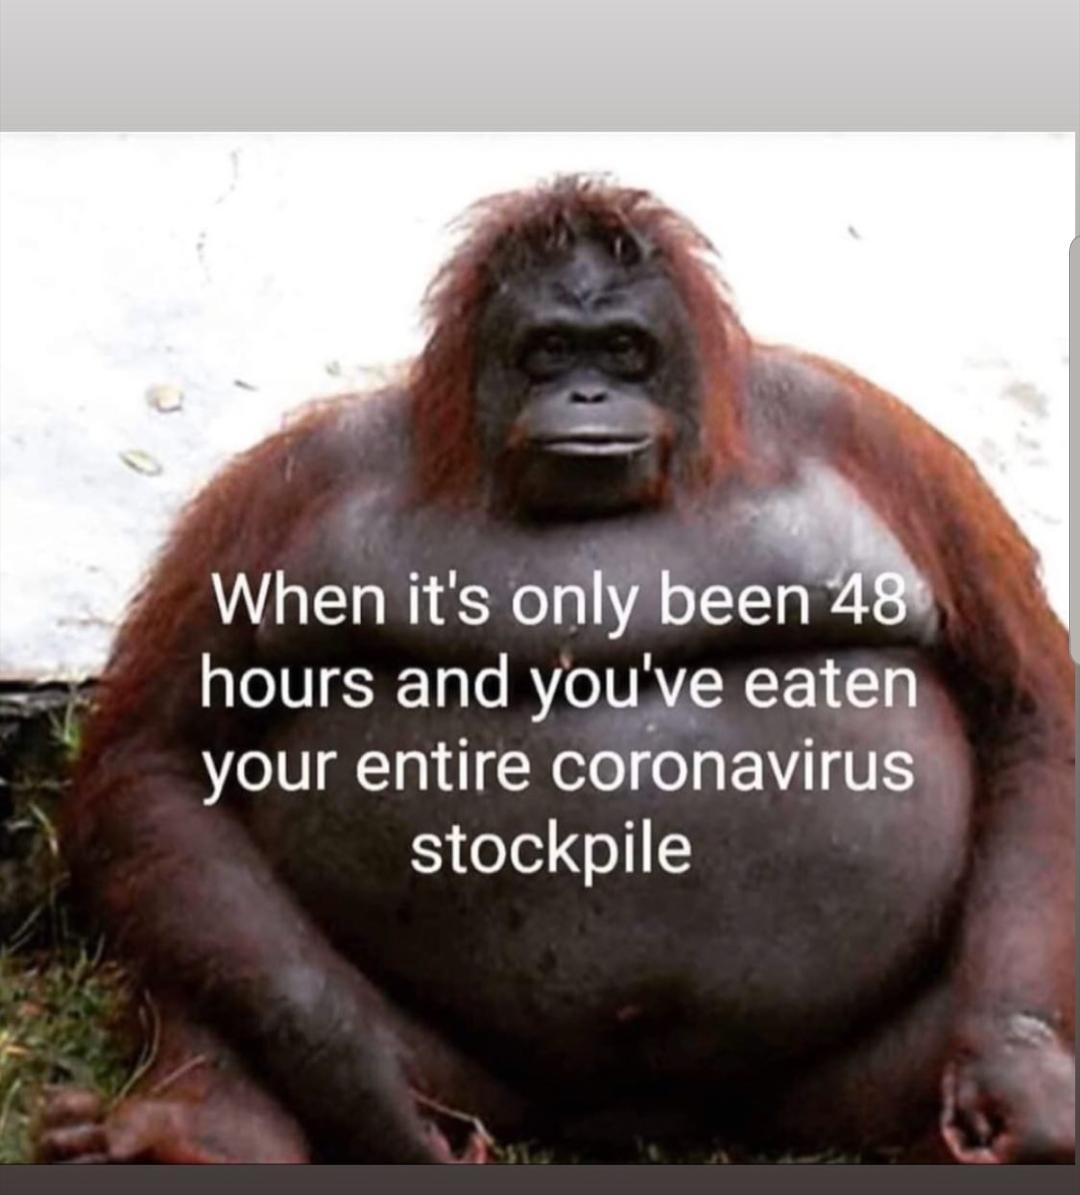 fat animals - When it's only been 48 hours and you've eaten your entire coronavirus stockpile